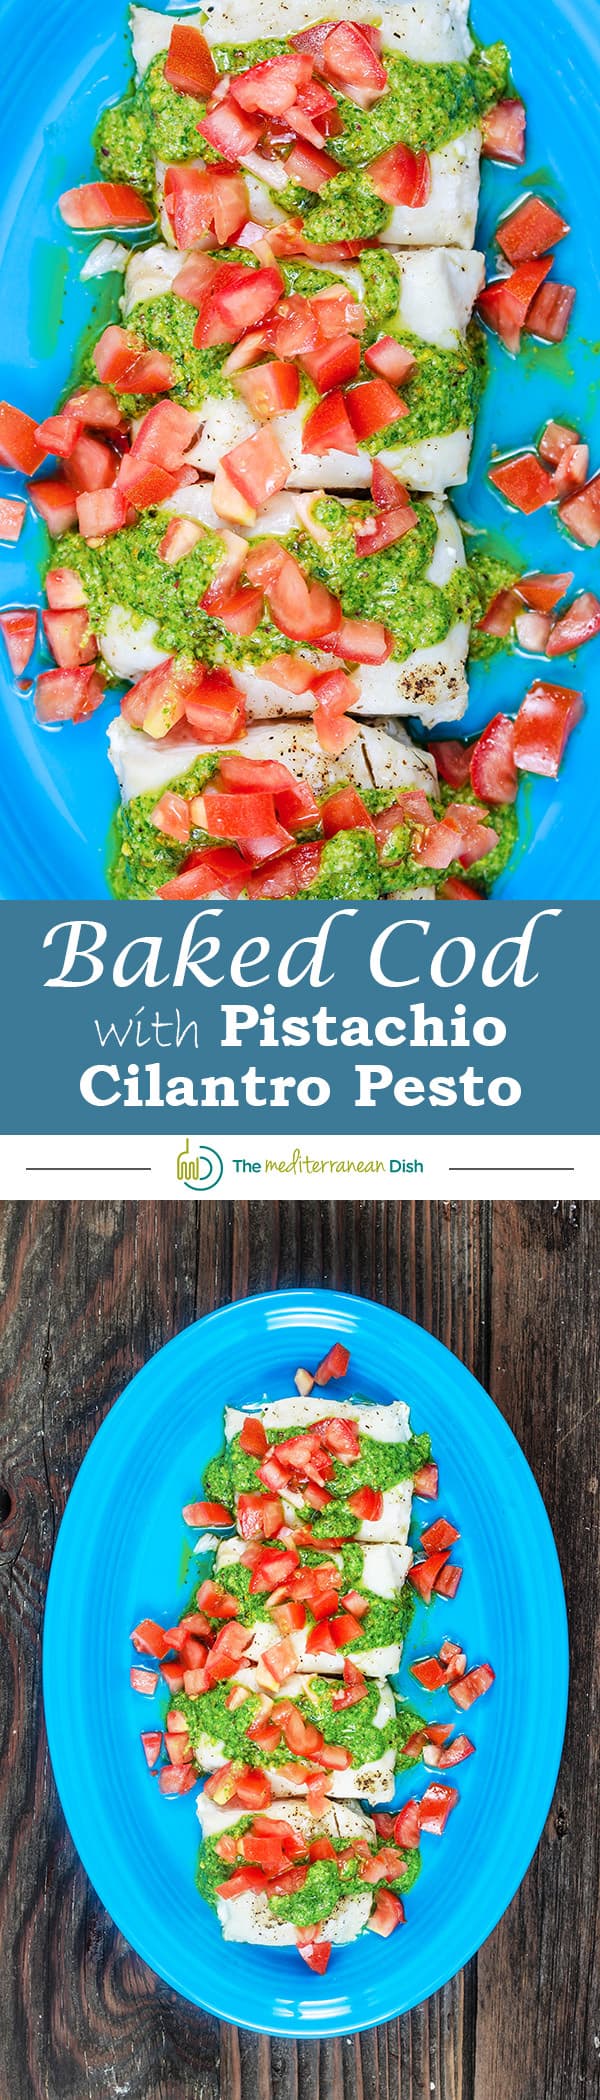 Baked Cod Recipe with Pistachio Cilantro Pesto | The Mediterranean Dish. A 25-minute baked cod dinner with bold flavors from cilantro, garlic, and lemon juice. See the two-step recipe on The Mediterranean Dish today!